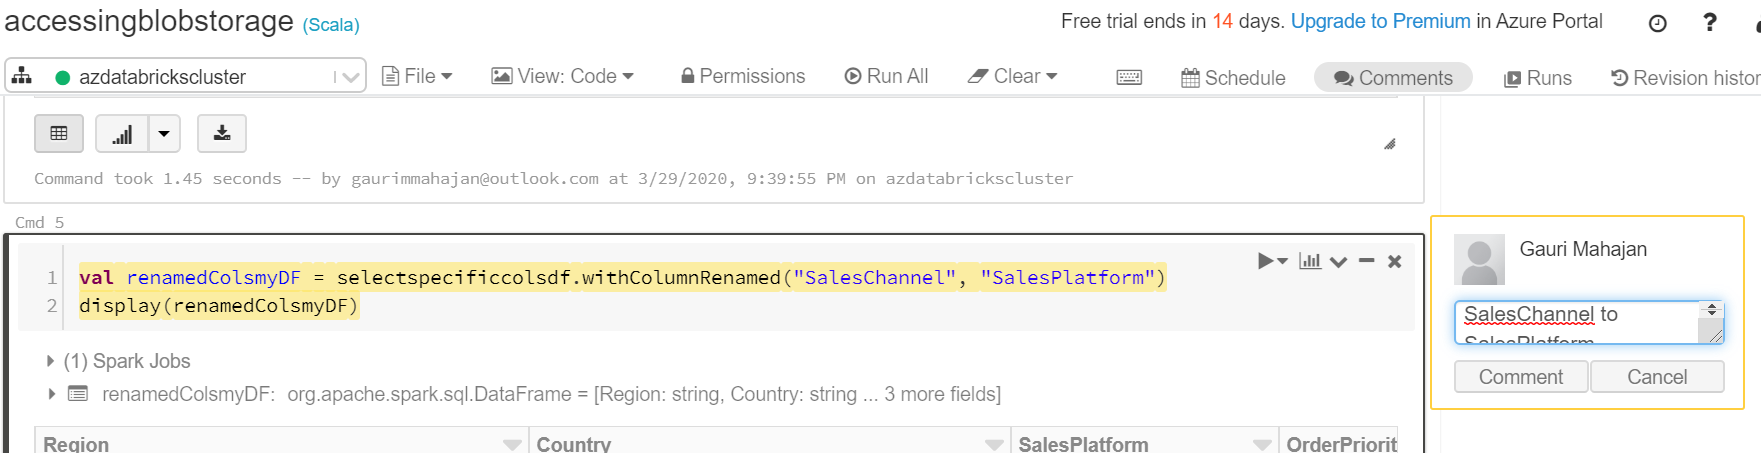 Commenting in the Scala notebook in Azure Databricks.